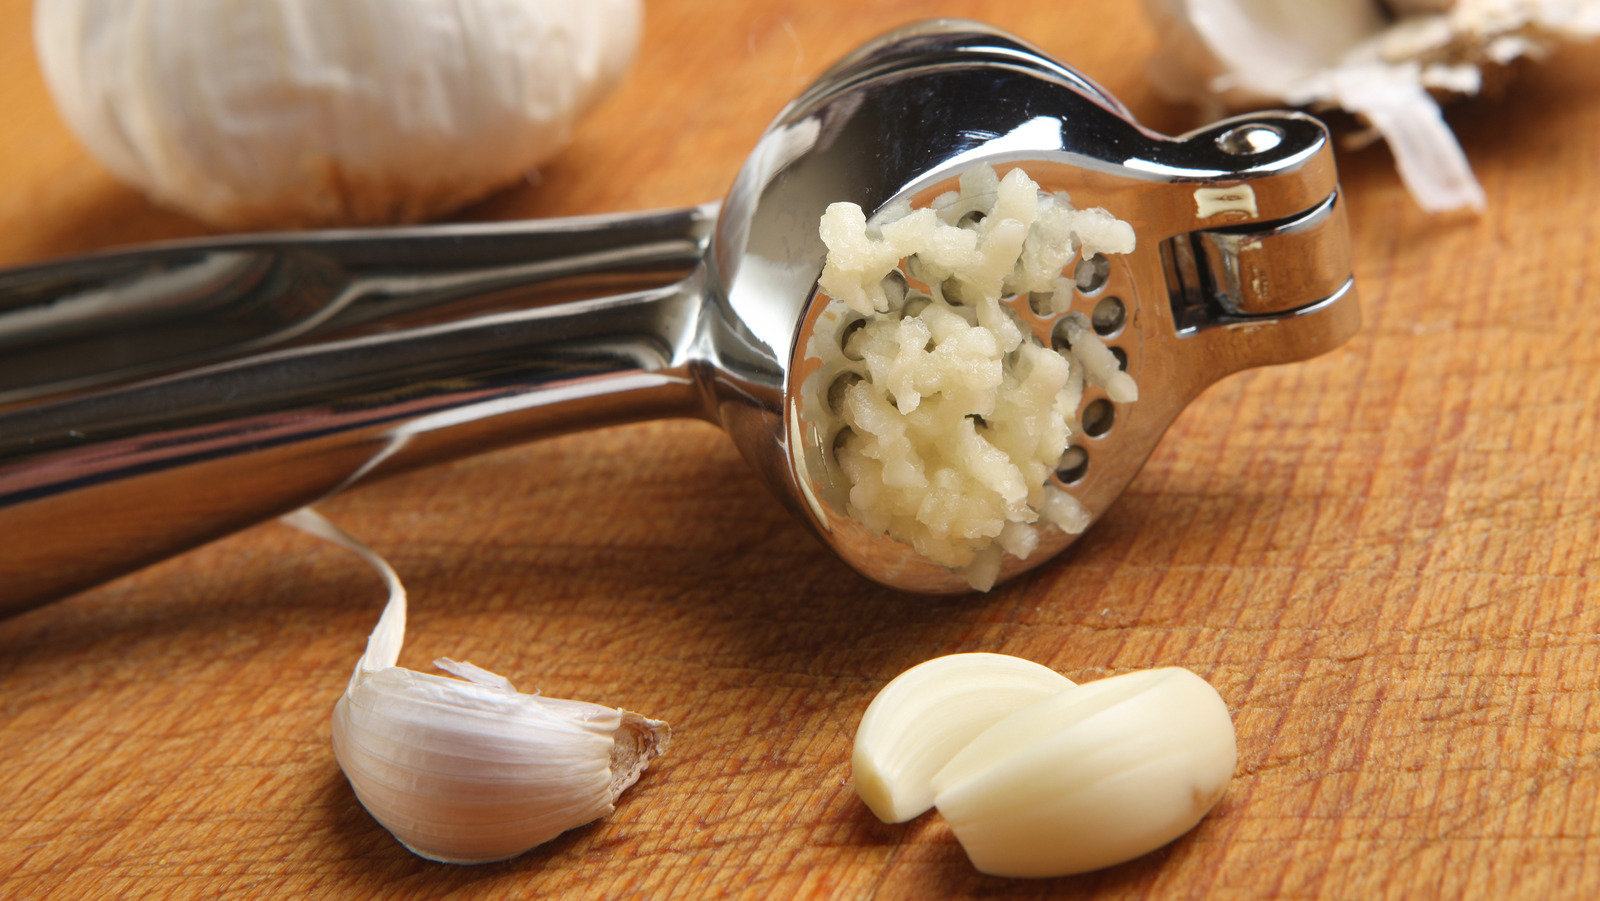 The easiest way to avoid the smell of garlic is to eat more of it